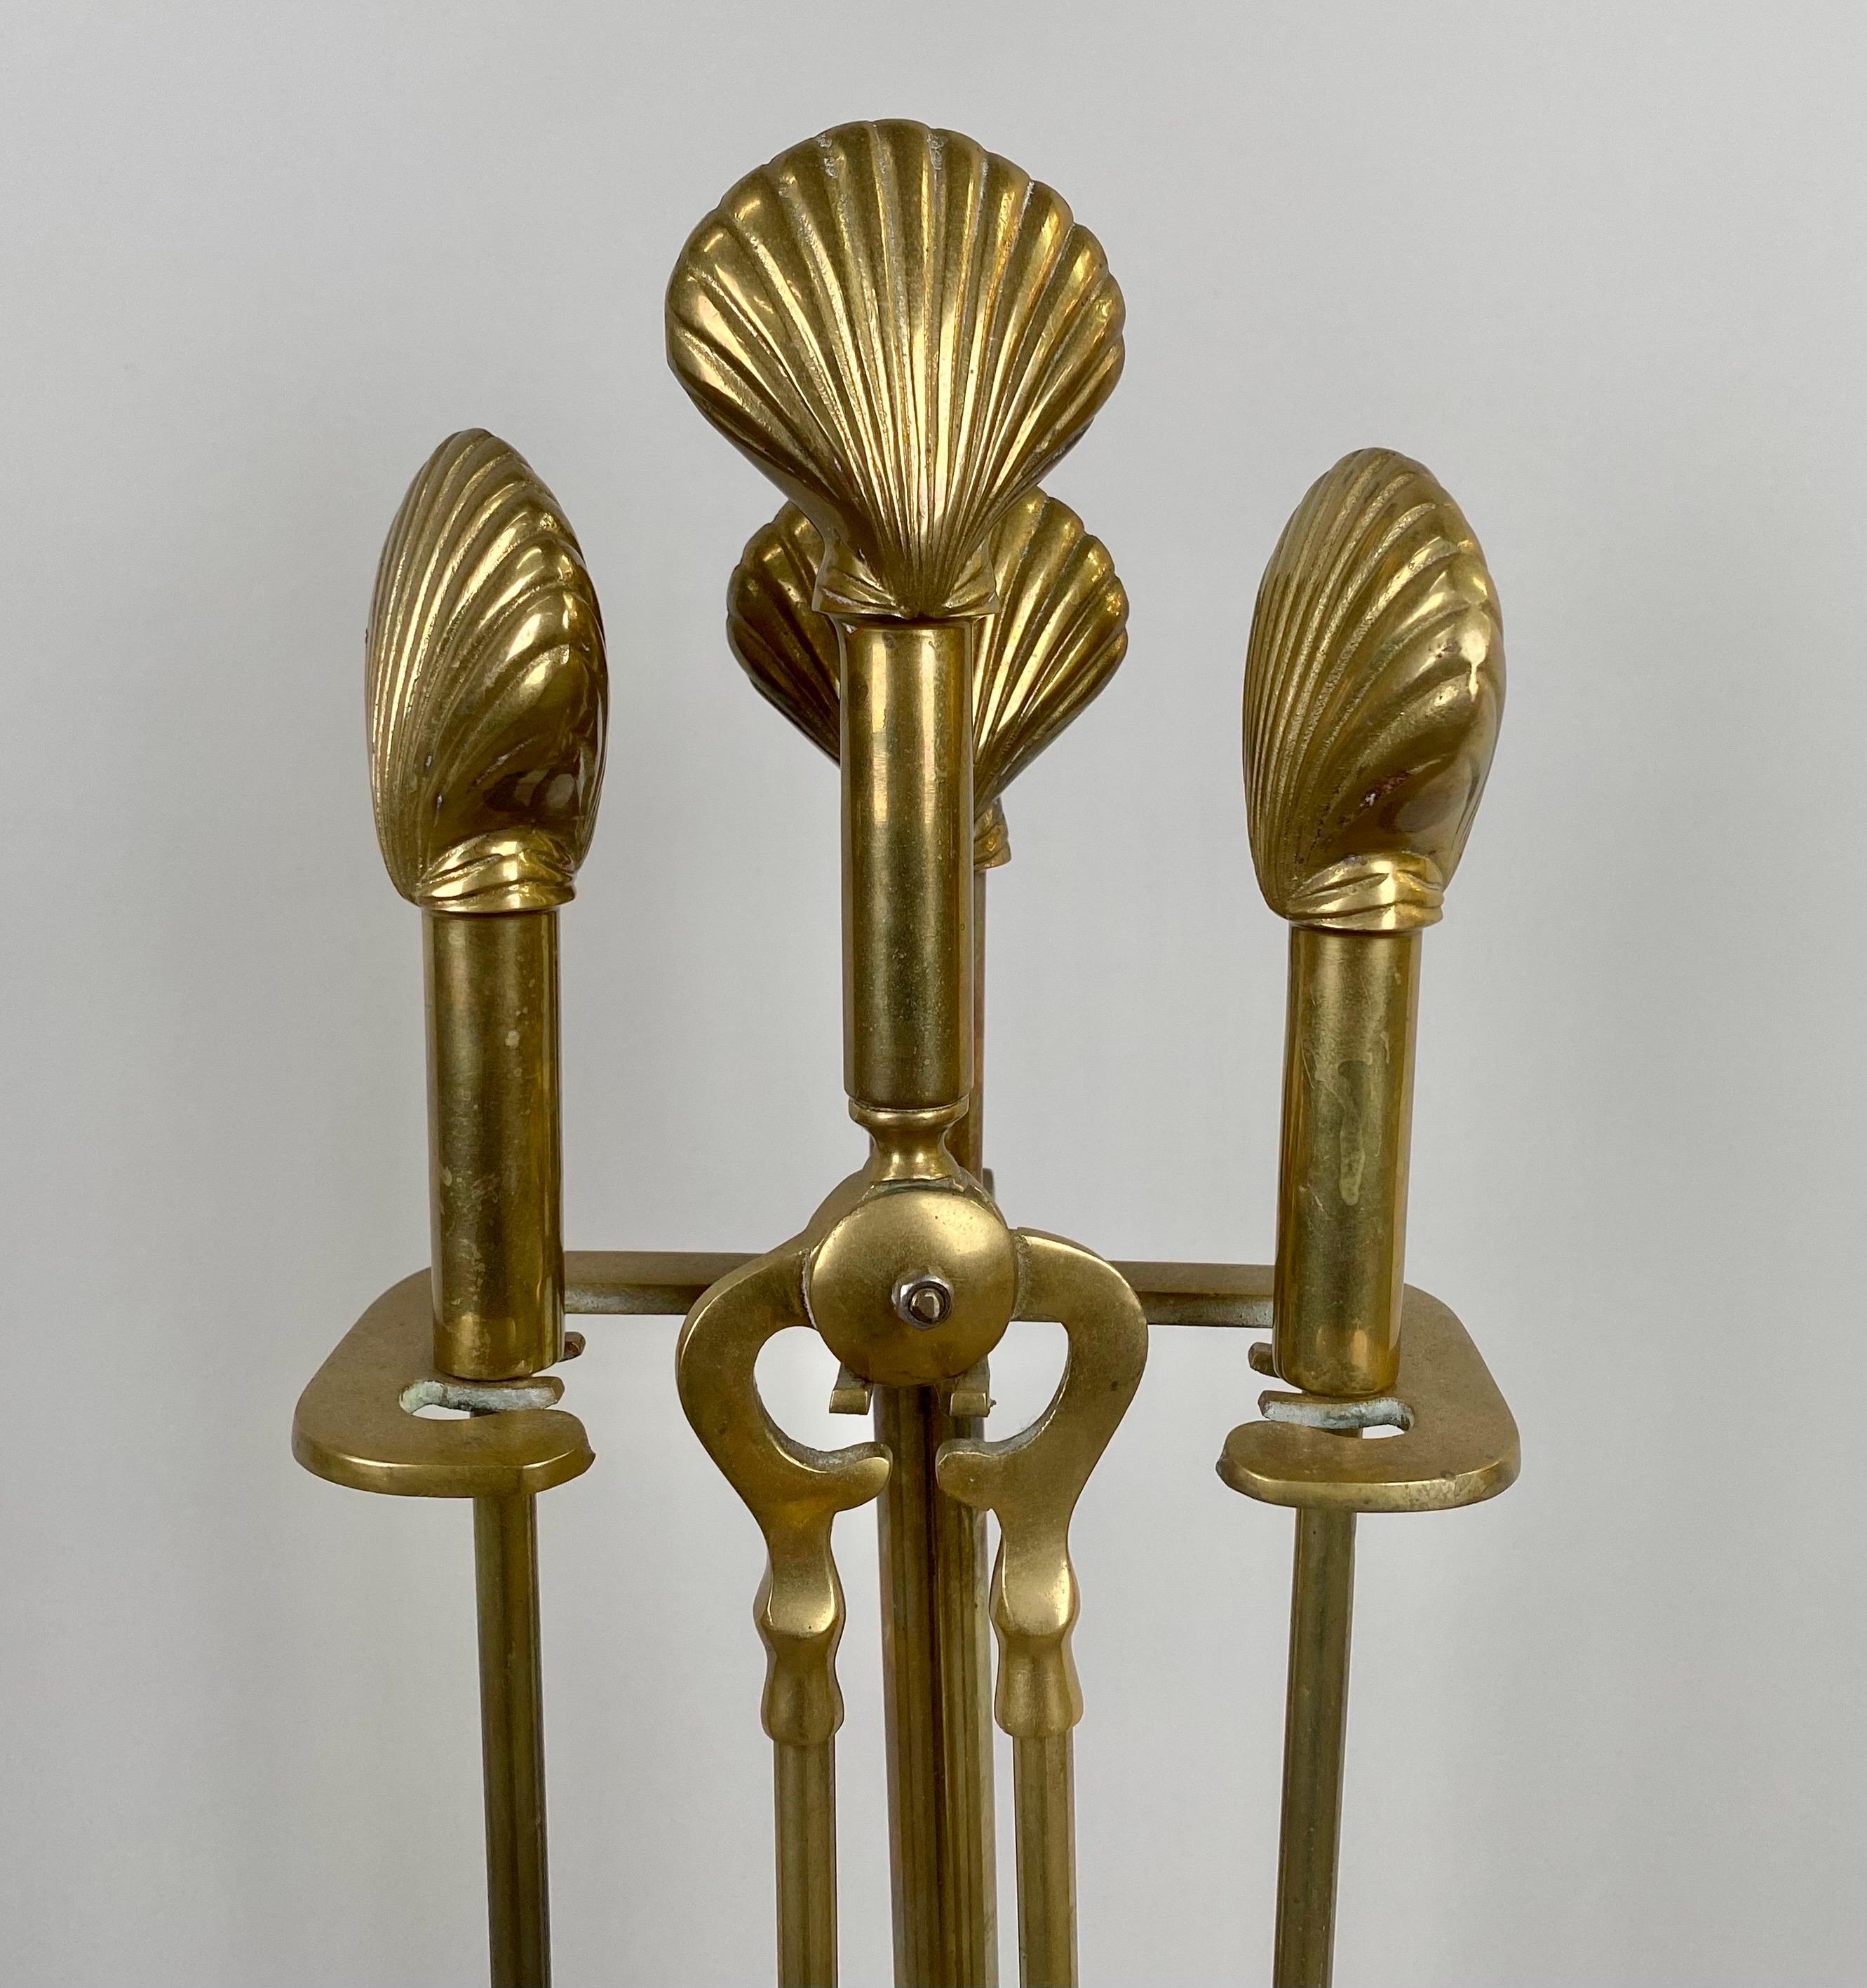 A set of Art Deco fireplace tools, comprising five exquisite pieces, each tool is forged from solid brass, showcasing both durability and opulence. Adorned with a graceful seashell design, these tools transcend functionality to become exquisite